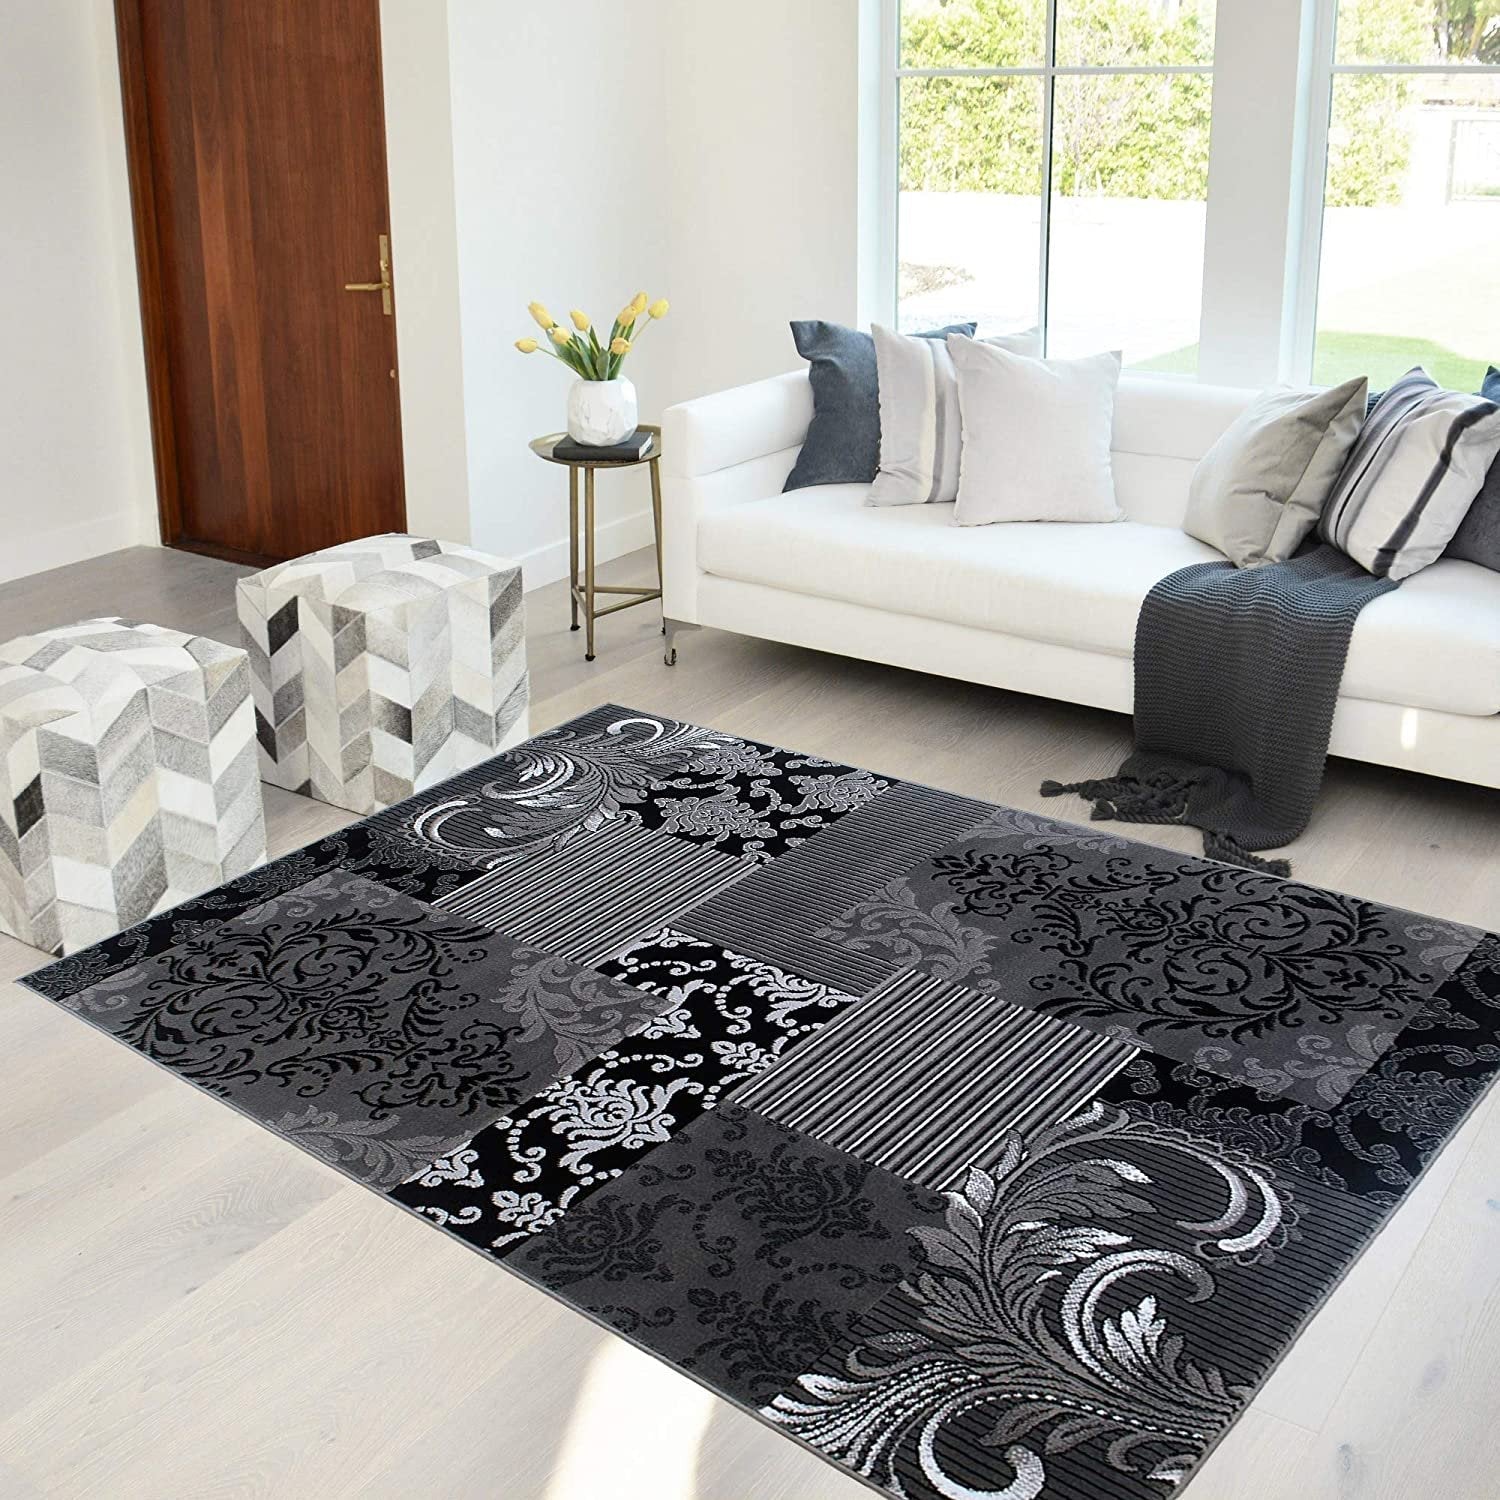 Gray Silver Black Abstract Area Rug Modernpatchwork Pattern Frloral (5' x 7')